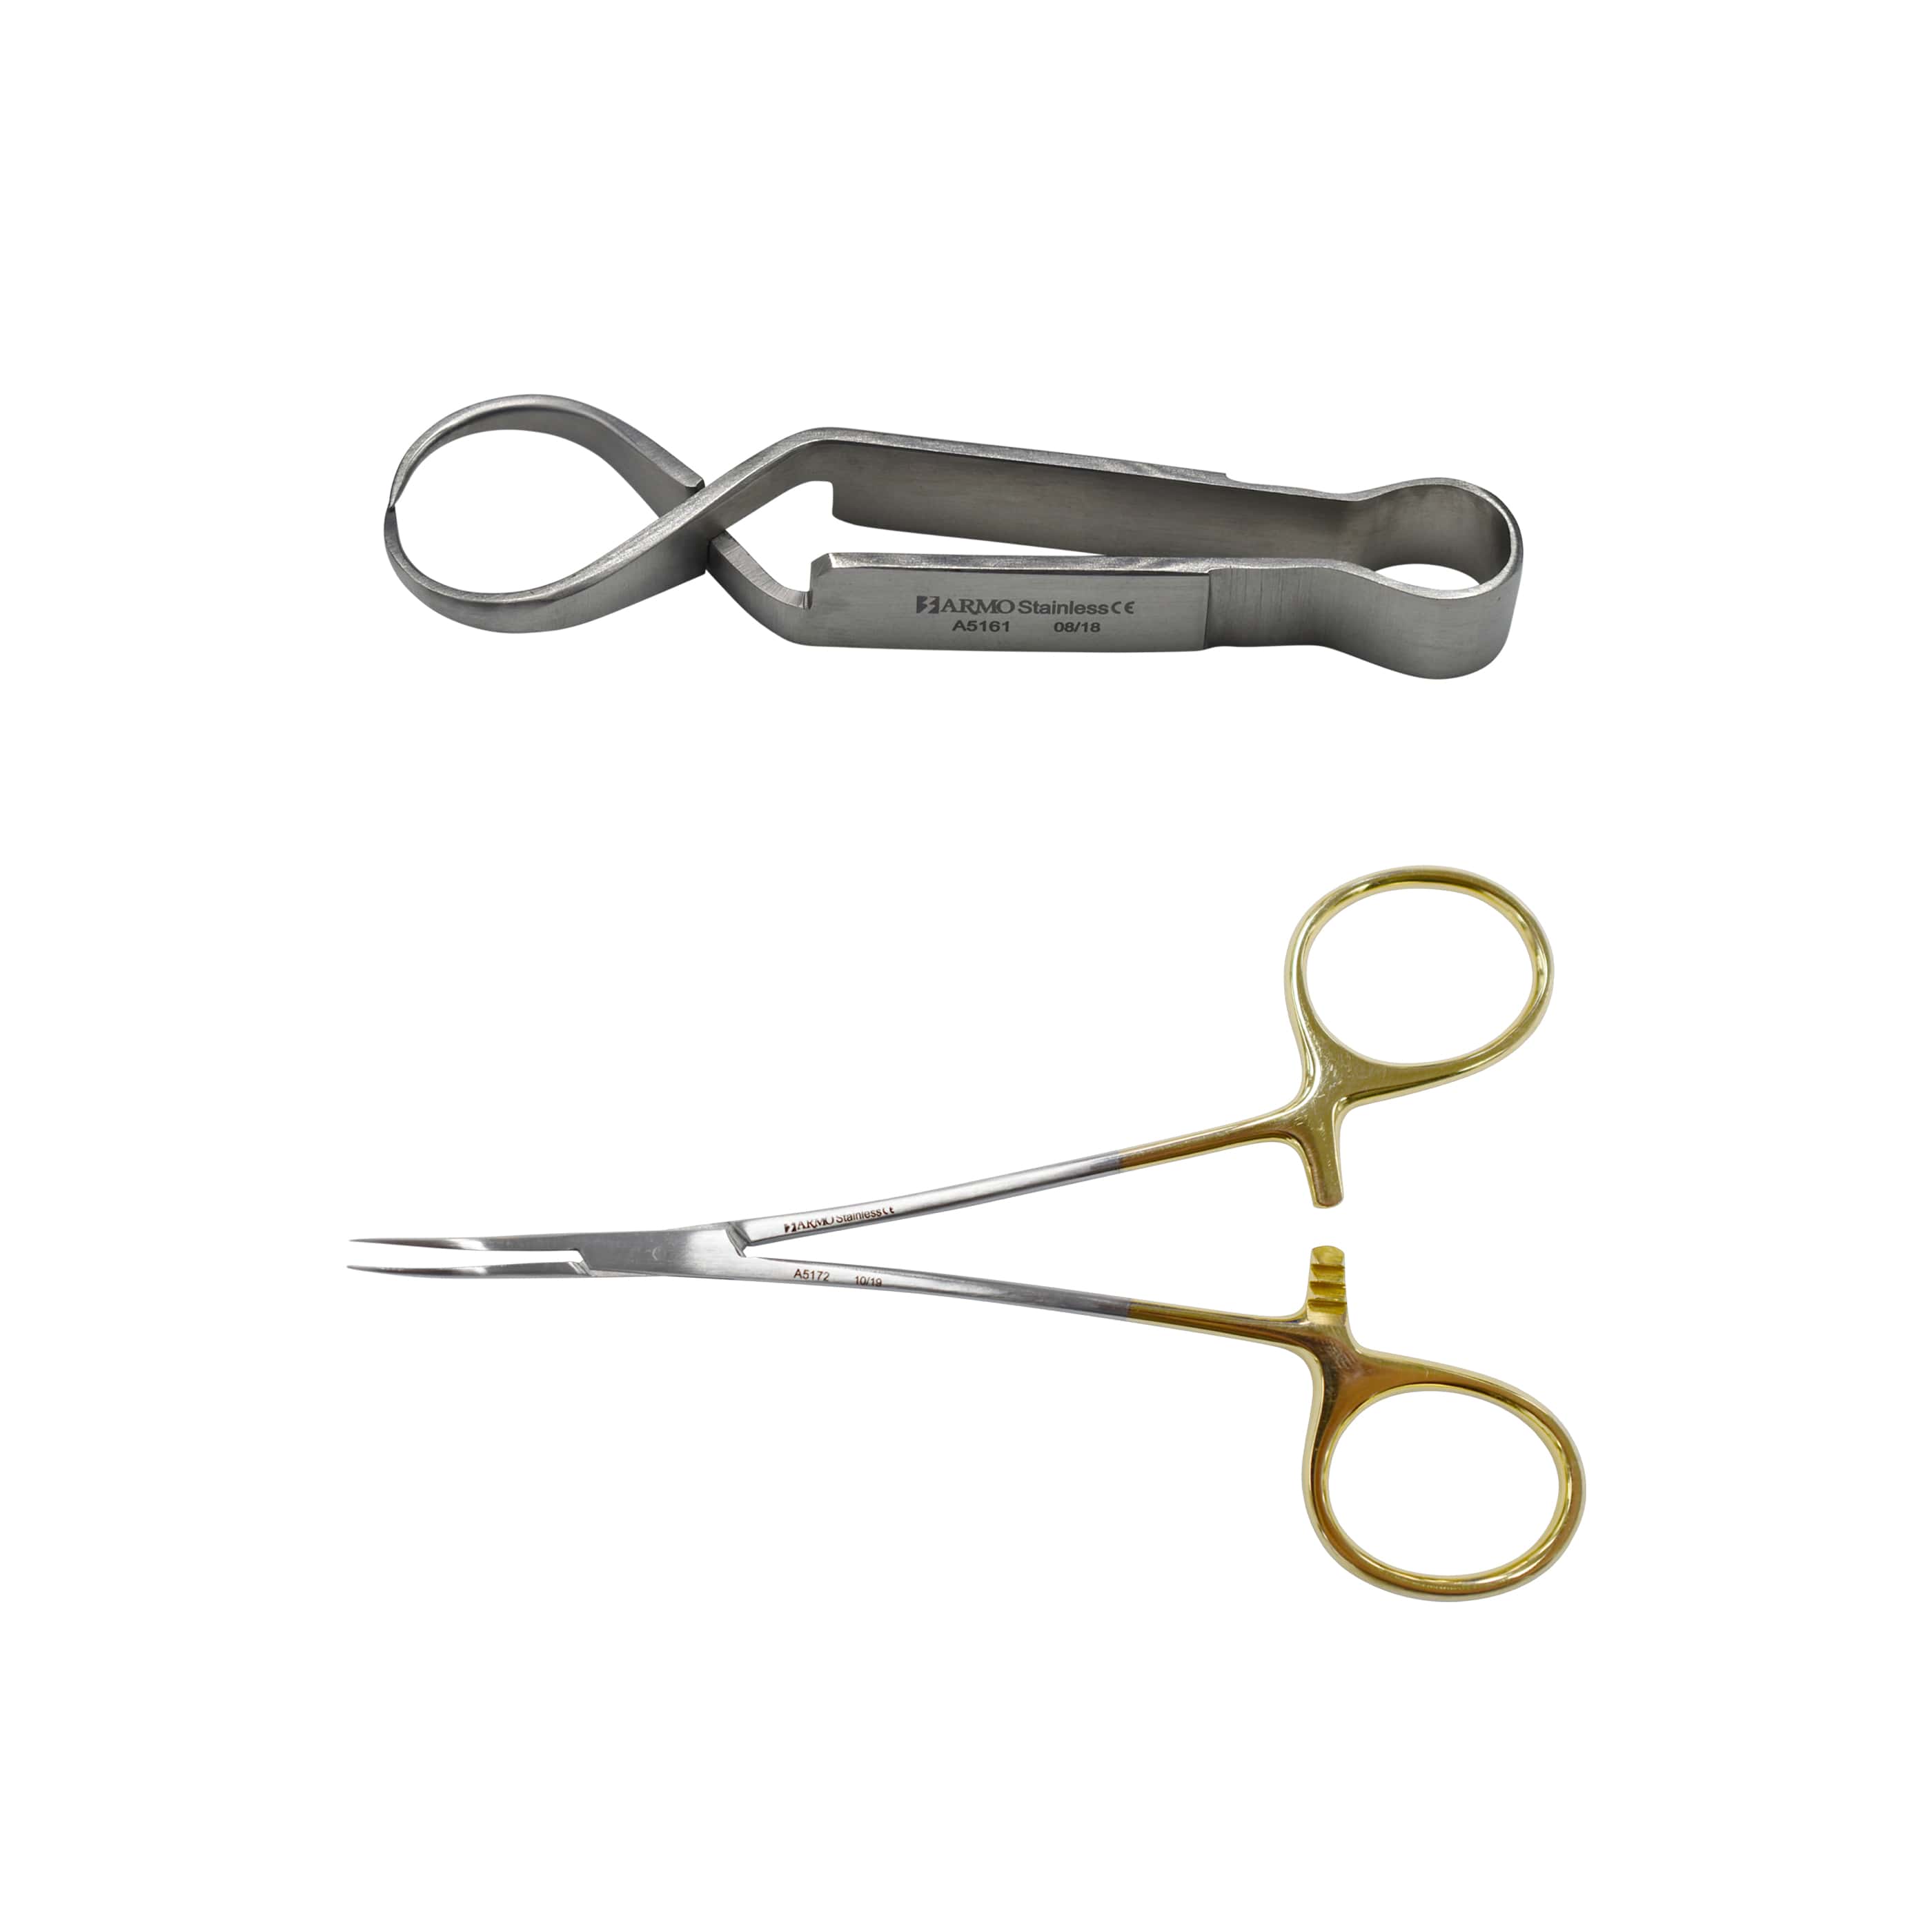 Other Forceps